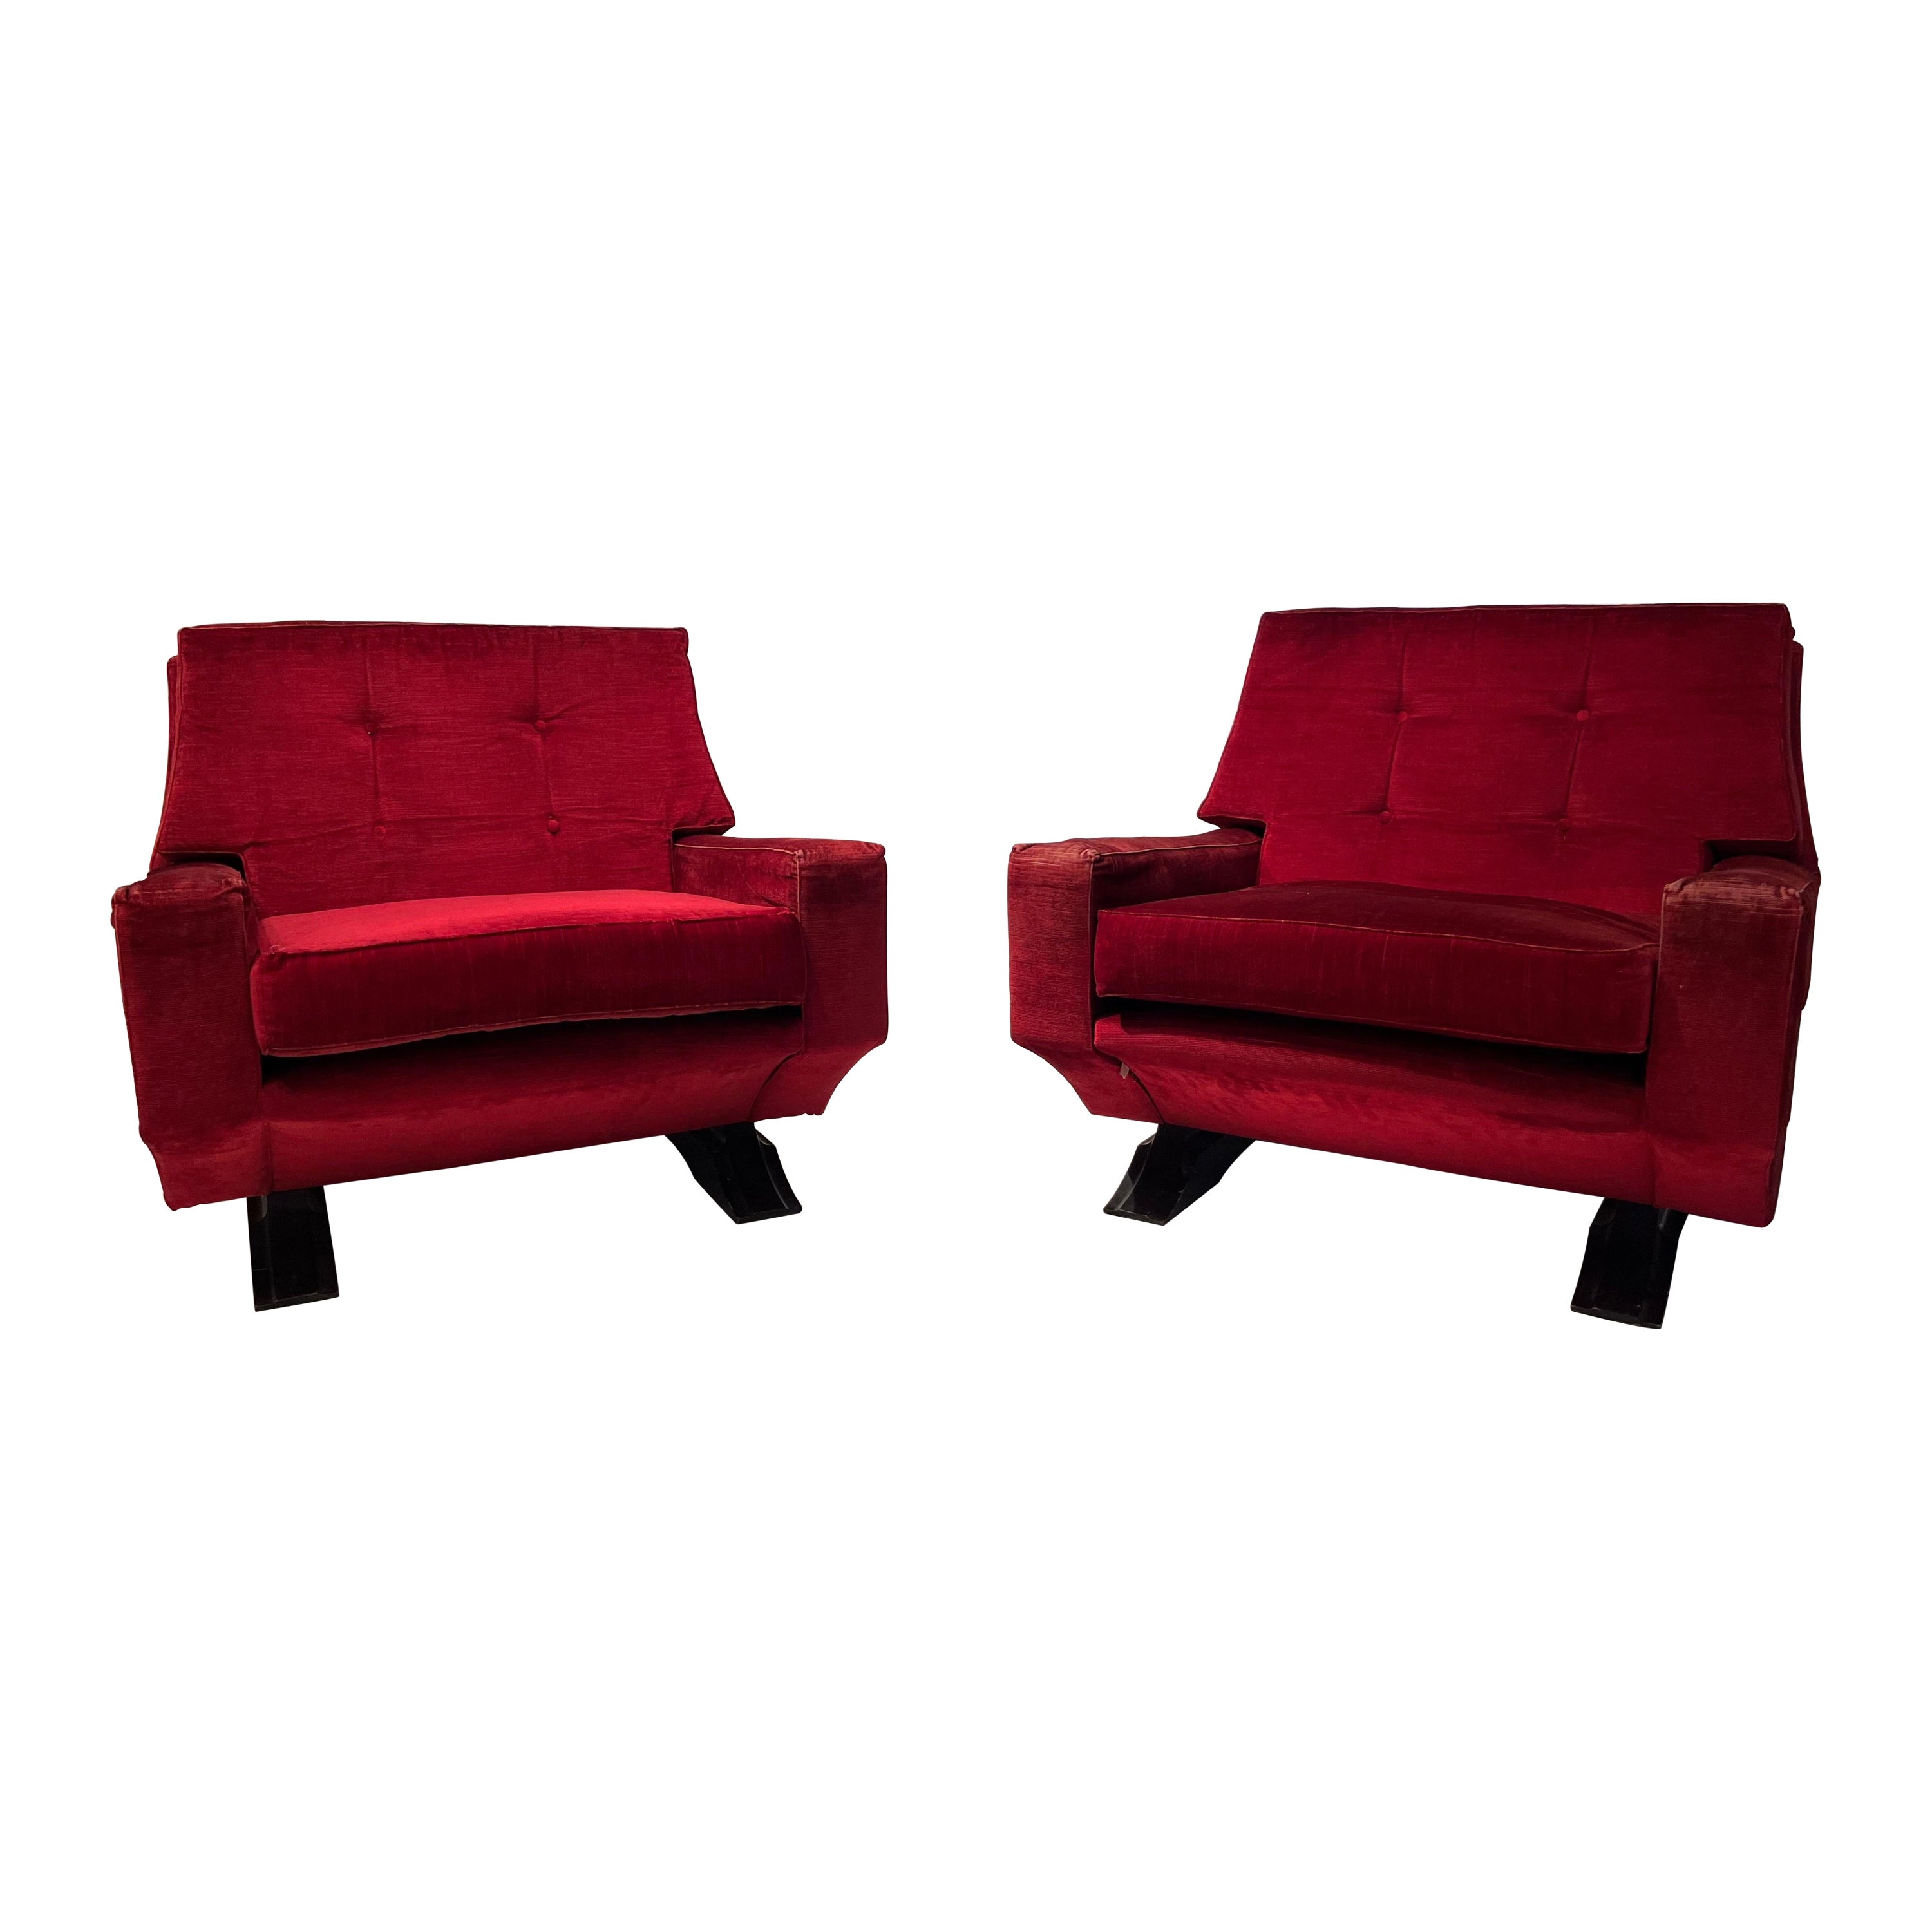 Pair of Armchairs by Franz Sartori for Flexform, 1965, Italy For Sale